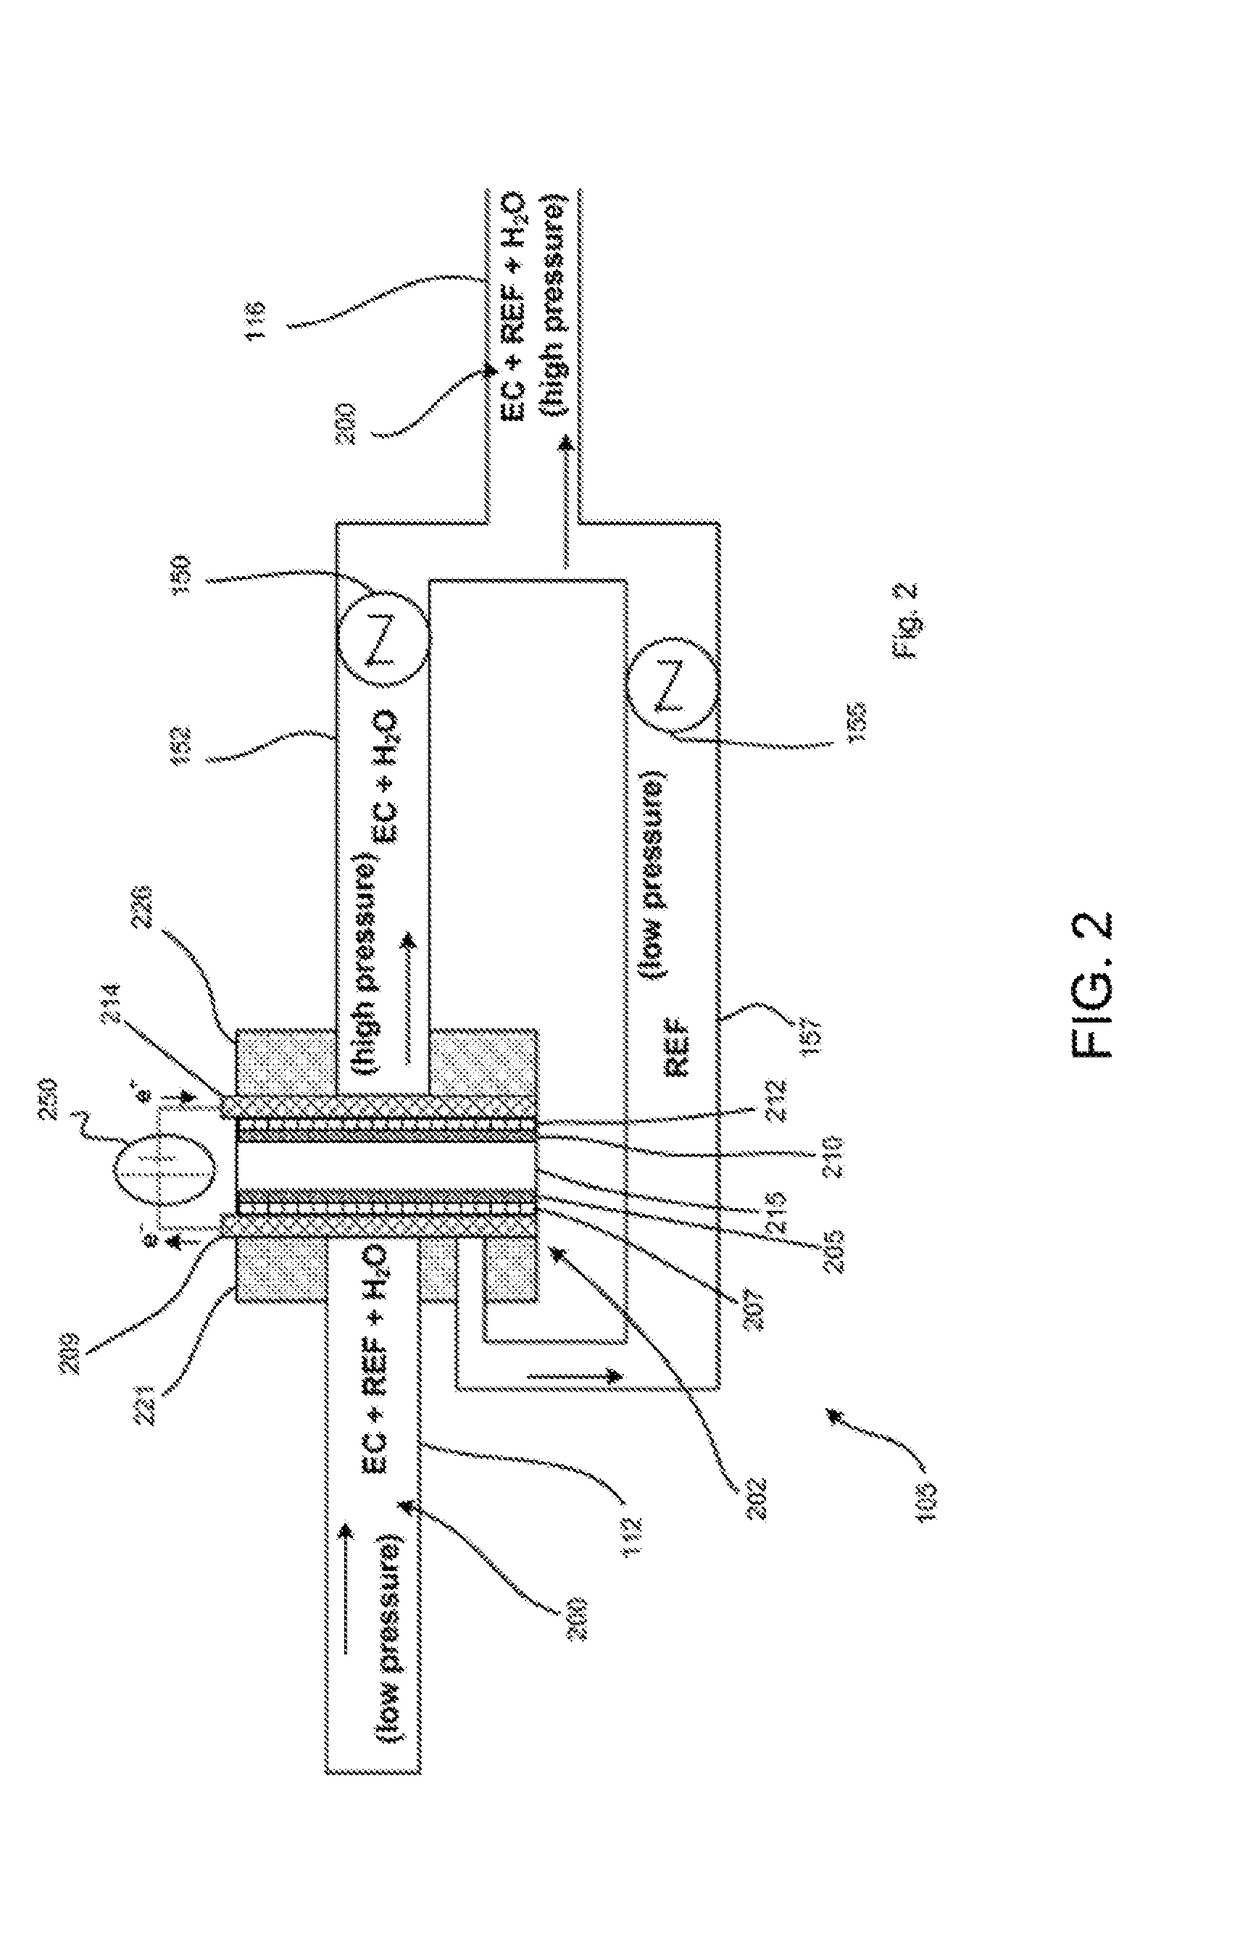 Electrochemical compressor with reactant conduit